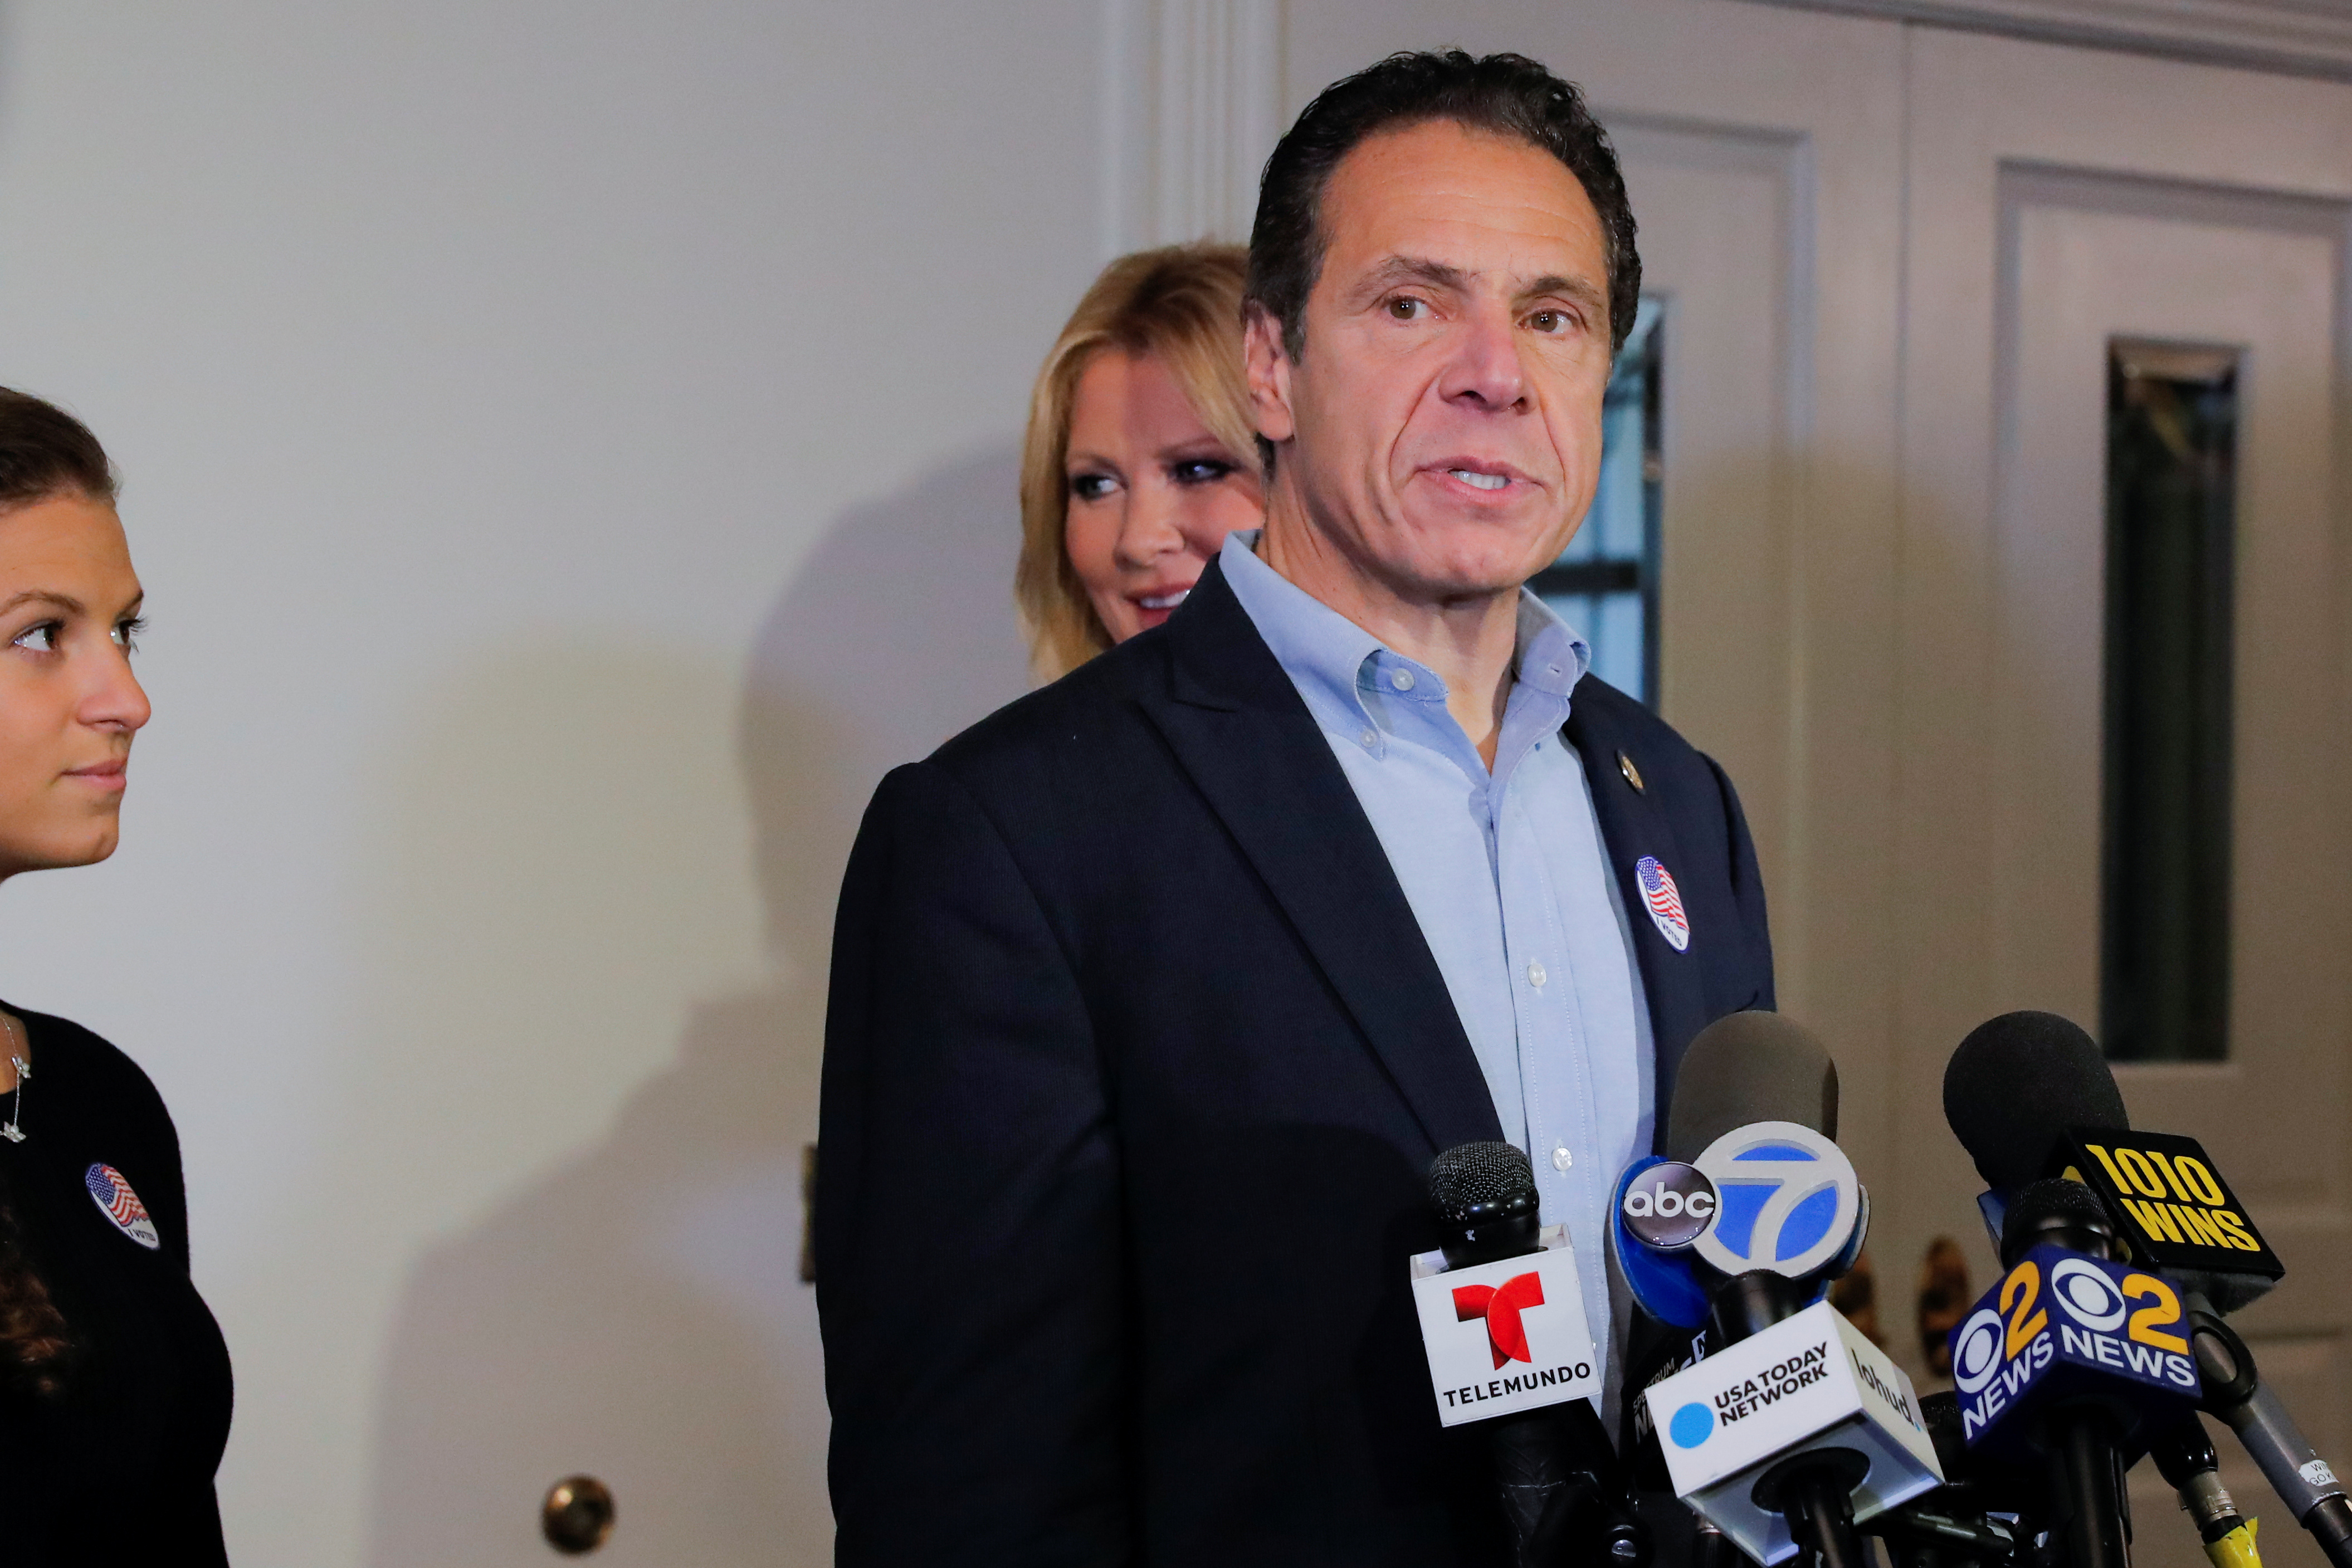 Democratic New York Governor Andrew Cuomo gives a news conference after voting for the midterm elections, at the Presbyterian Church in Mt. Kisco, New York